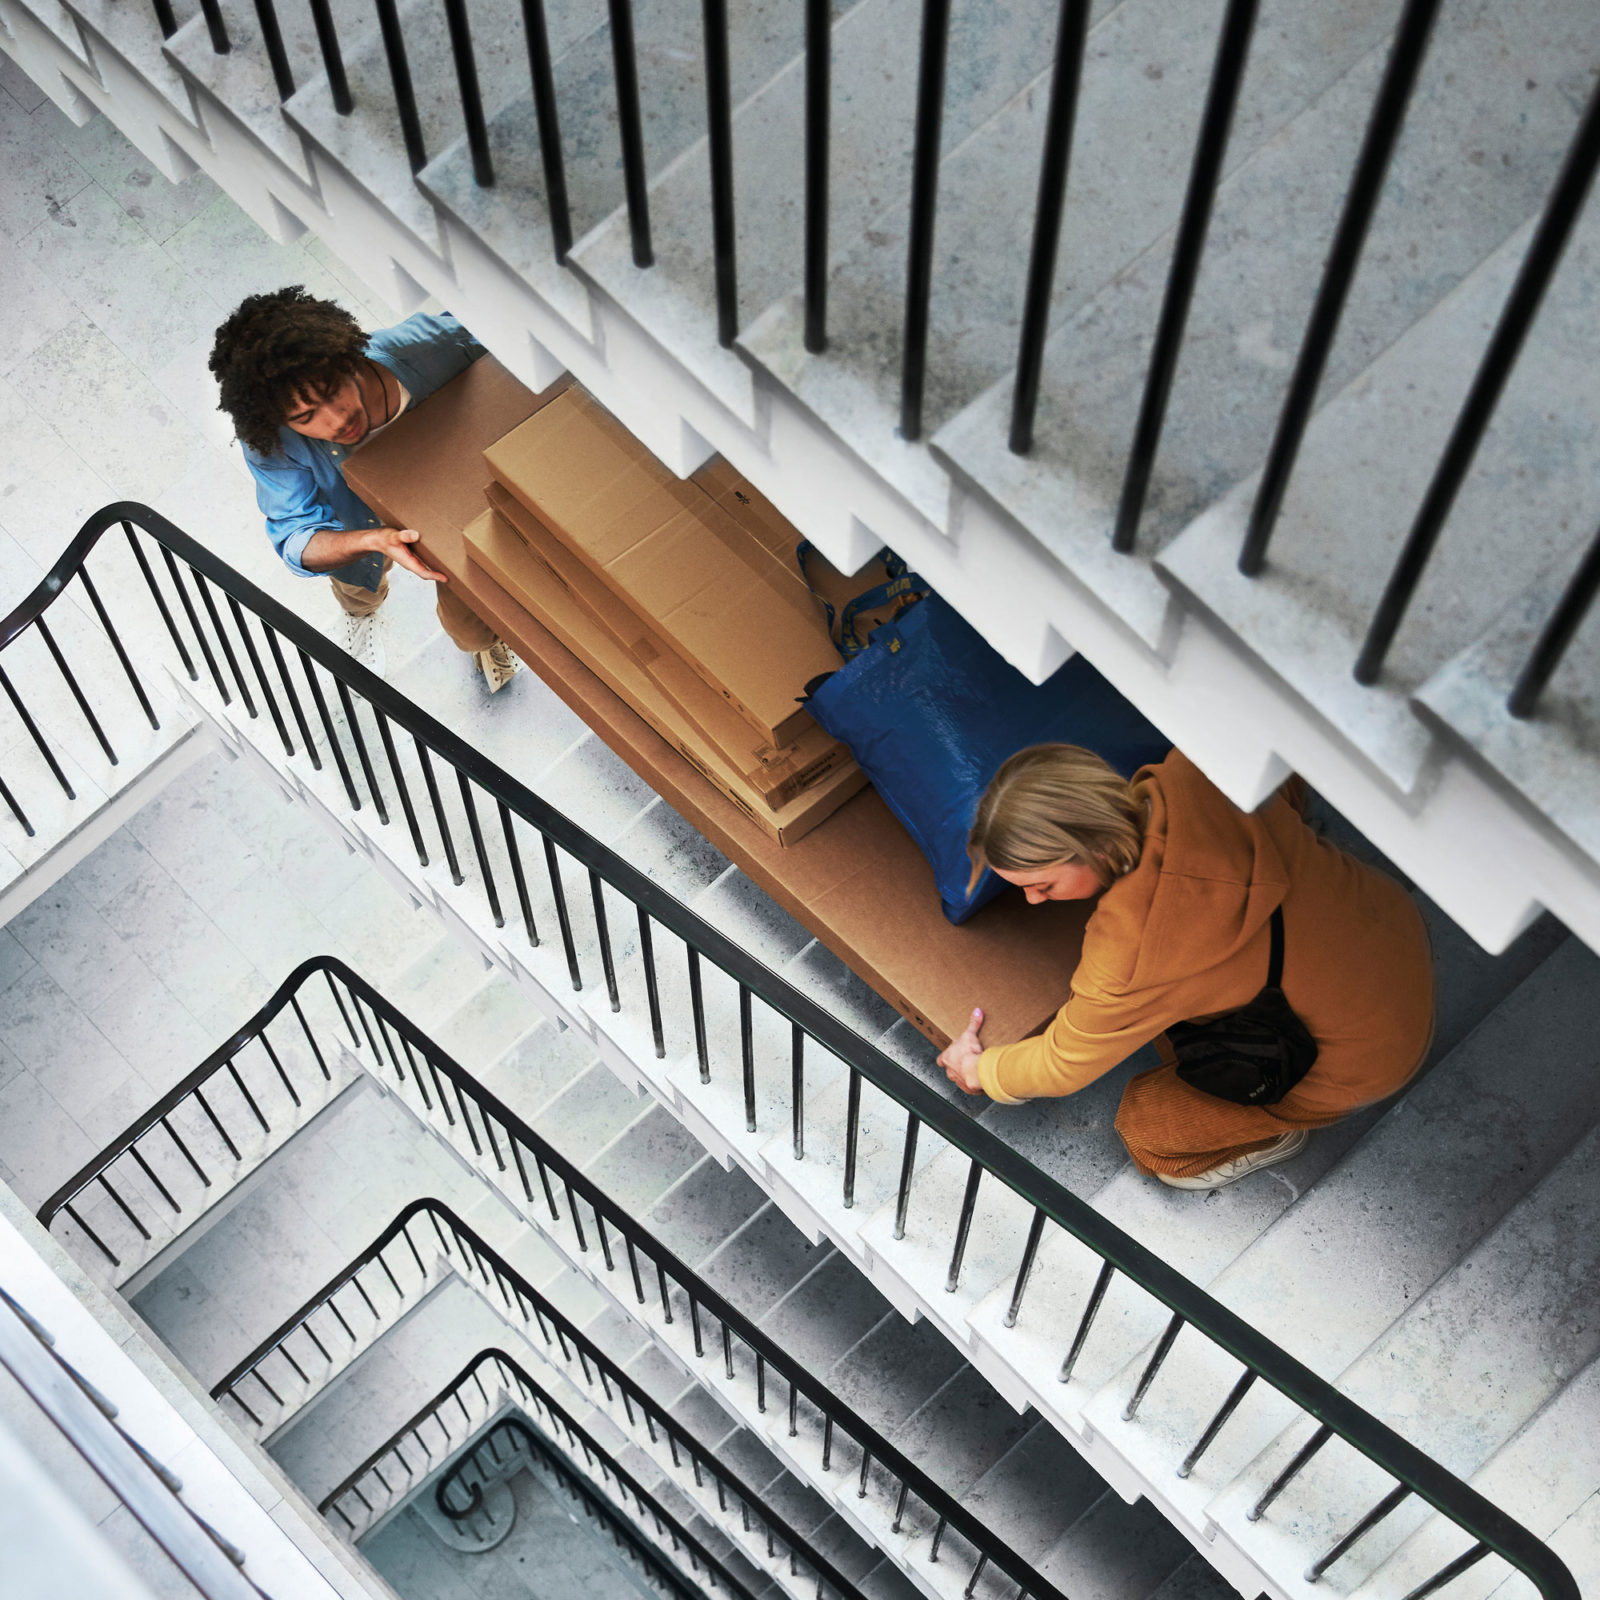 A young man and woman carrying a stack of big, heavy-looking flat packs from IKEA up a stairwell together.